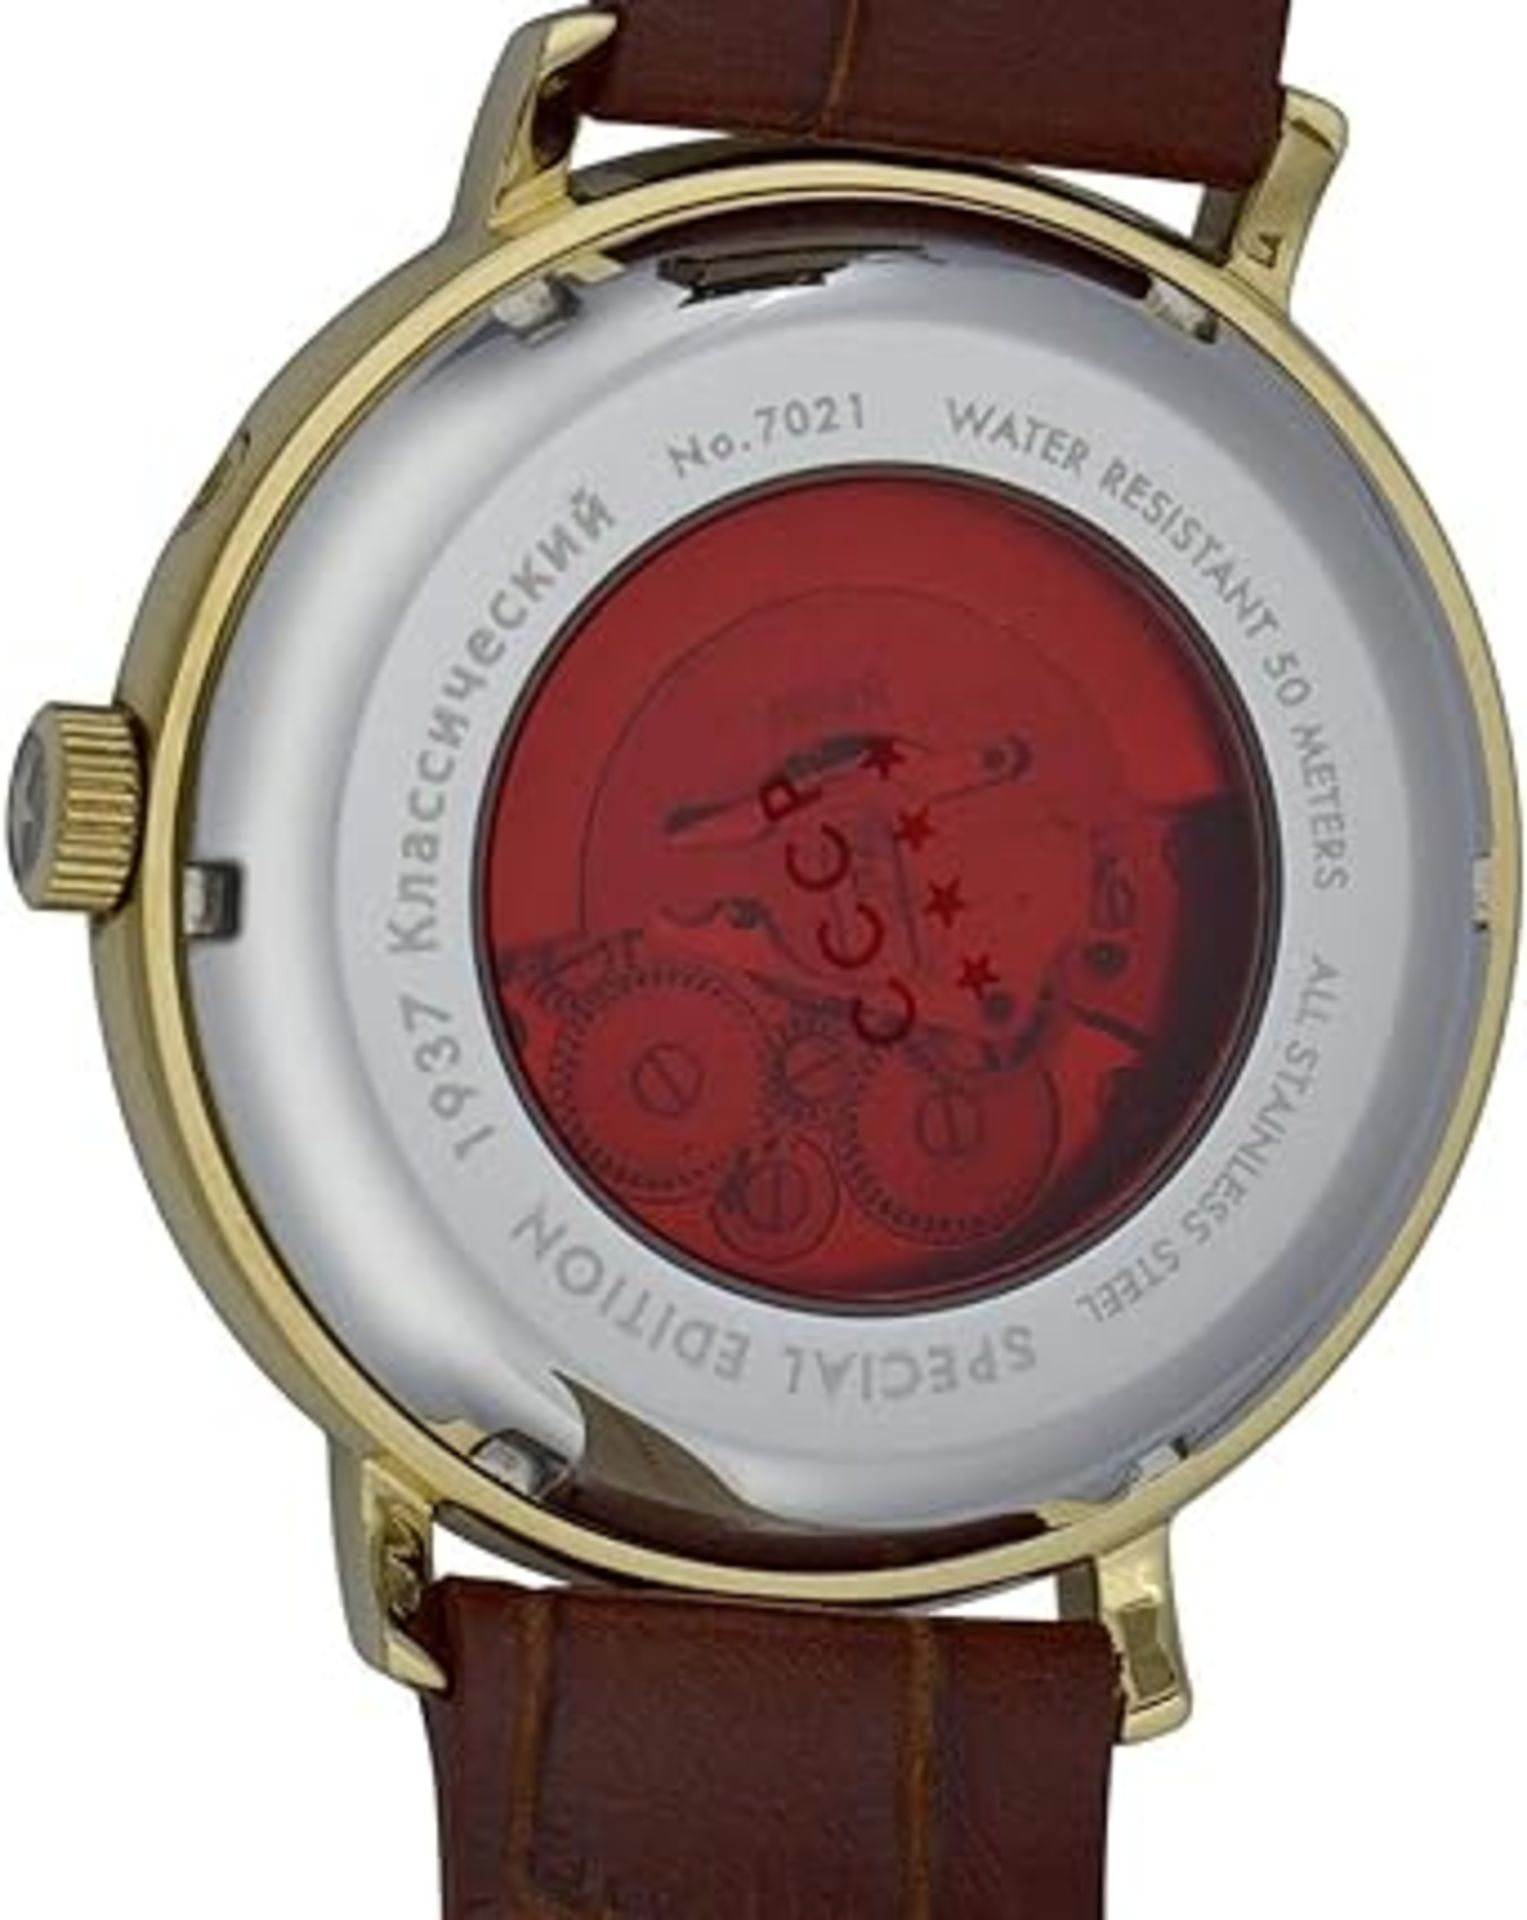 CCCP Men's CP-7021-03 Heritage Analog Display Automatic Self-Wind Brown Watch - Image 6 of 7